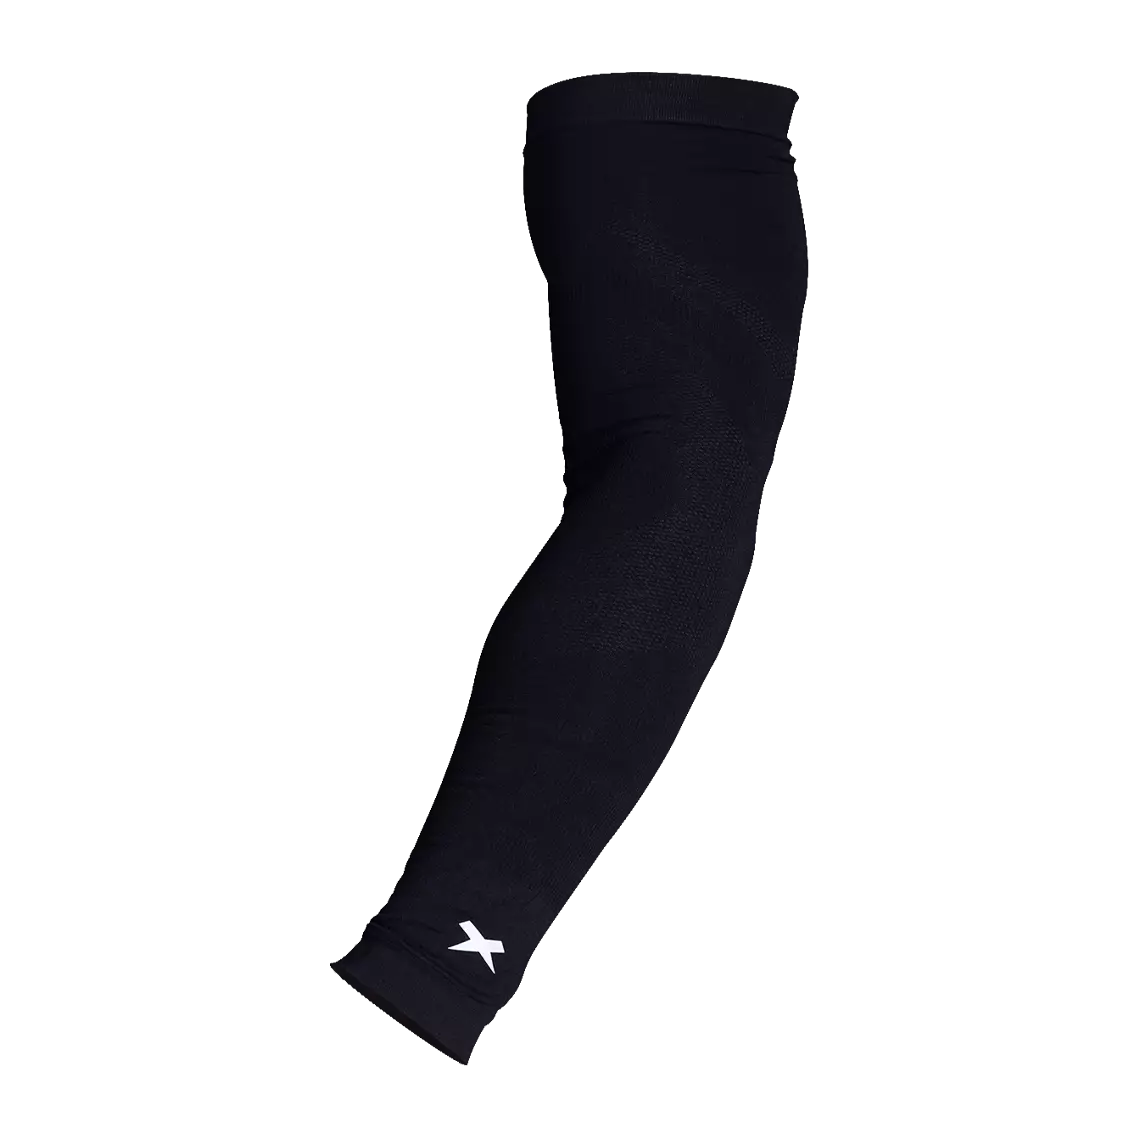 Outer view of black Xenith compression sleeve.